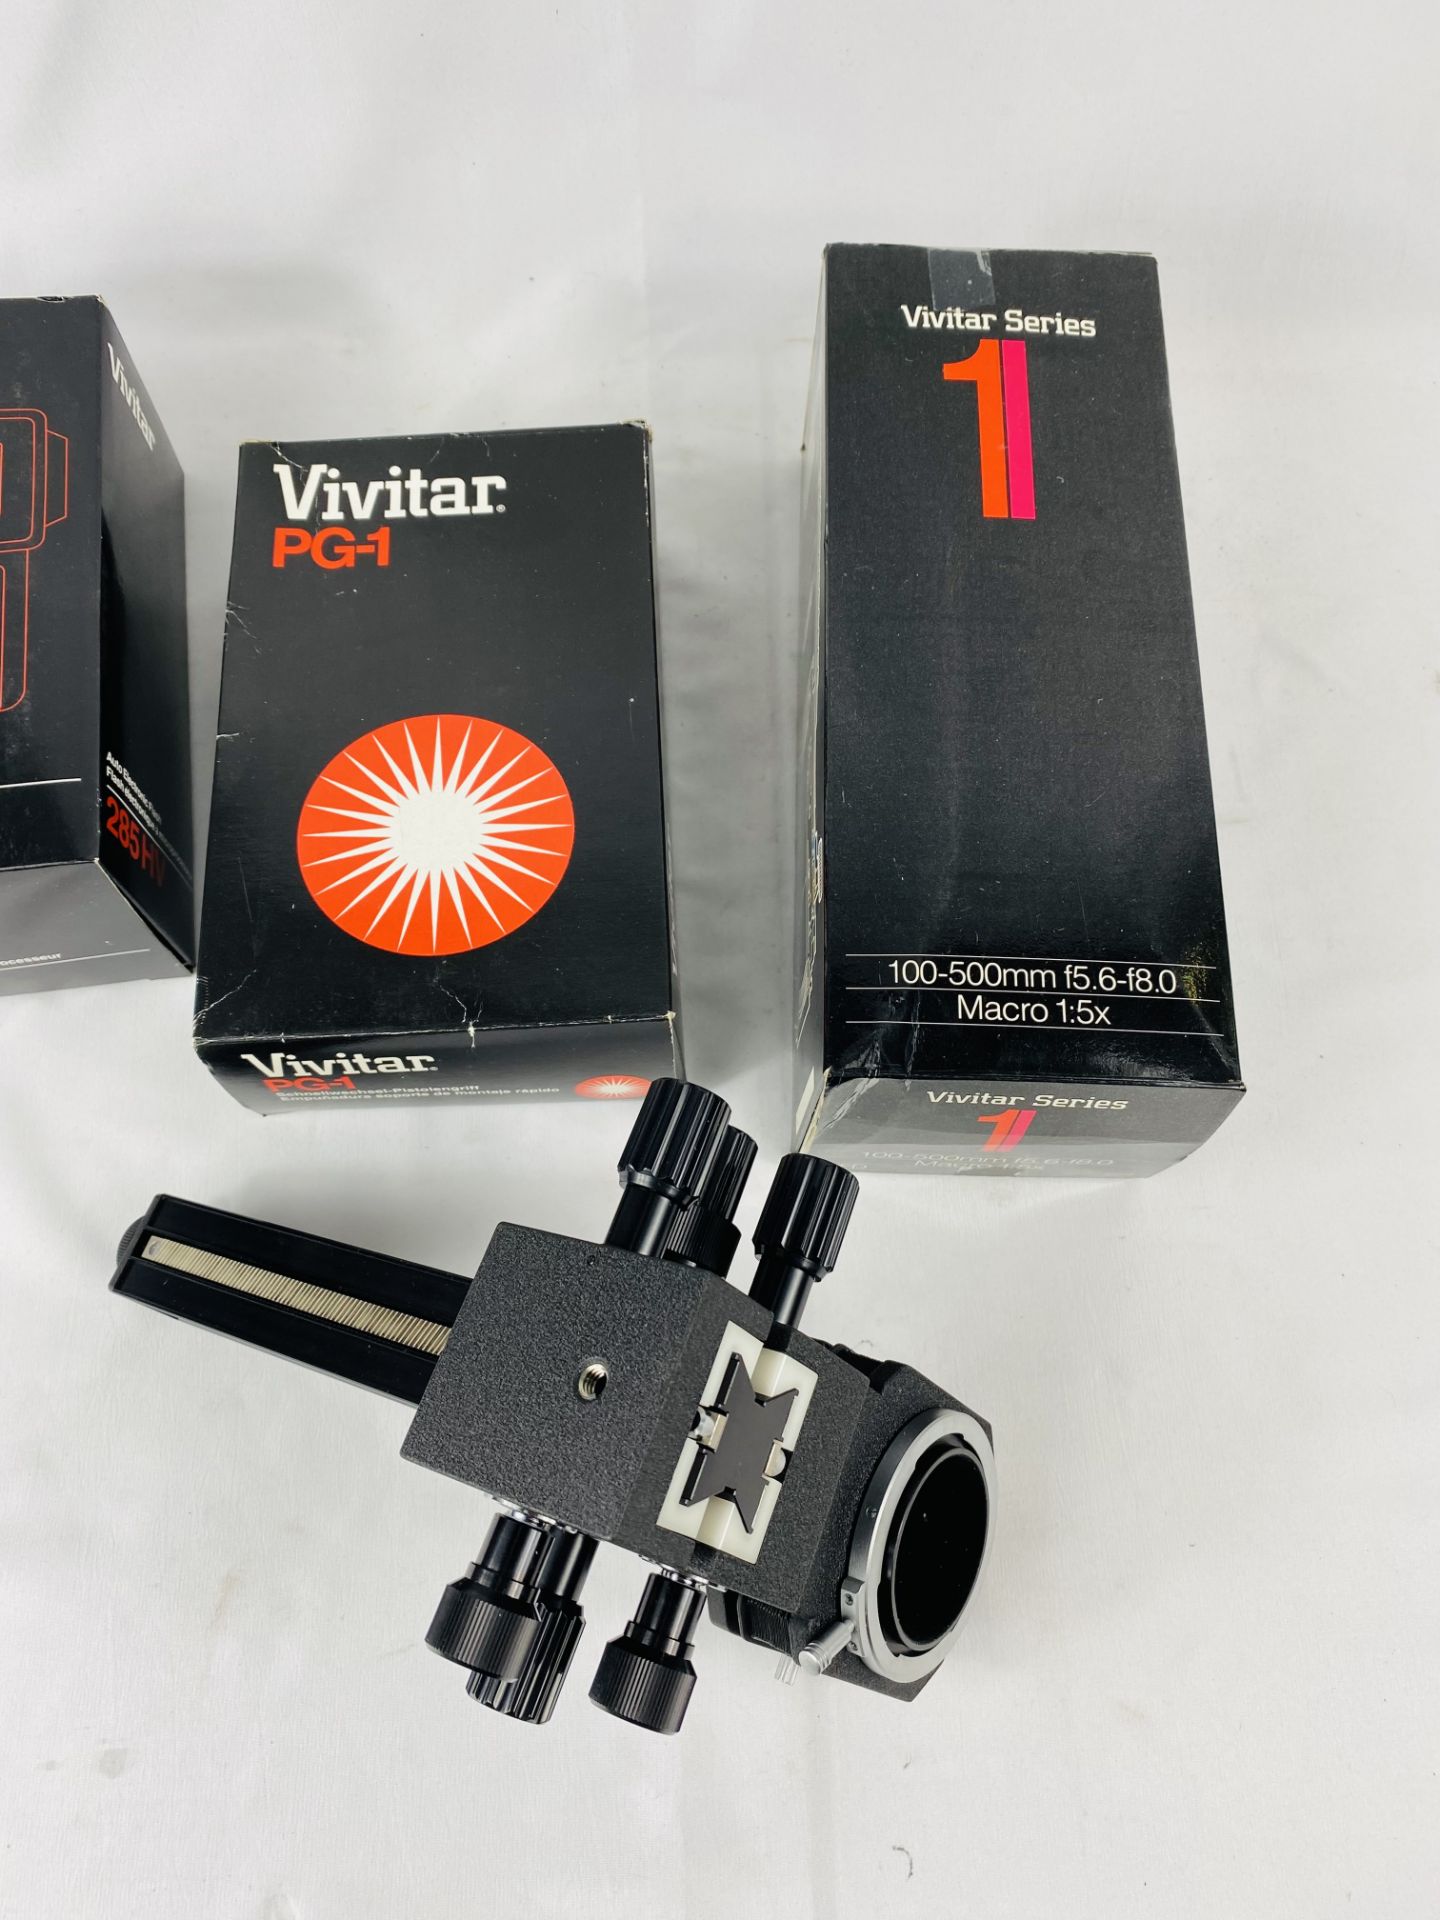 Vivitar macro lens and other camera accessories - Image 2 of 5